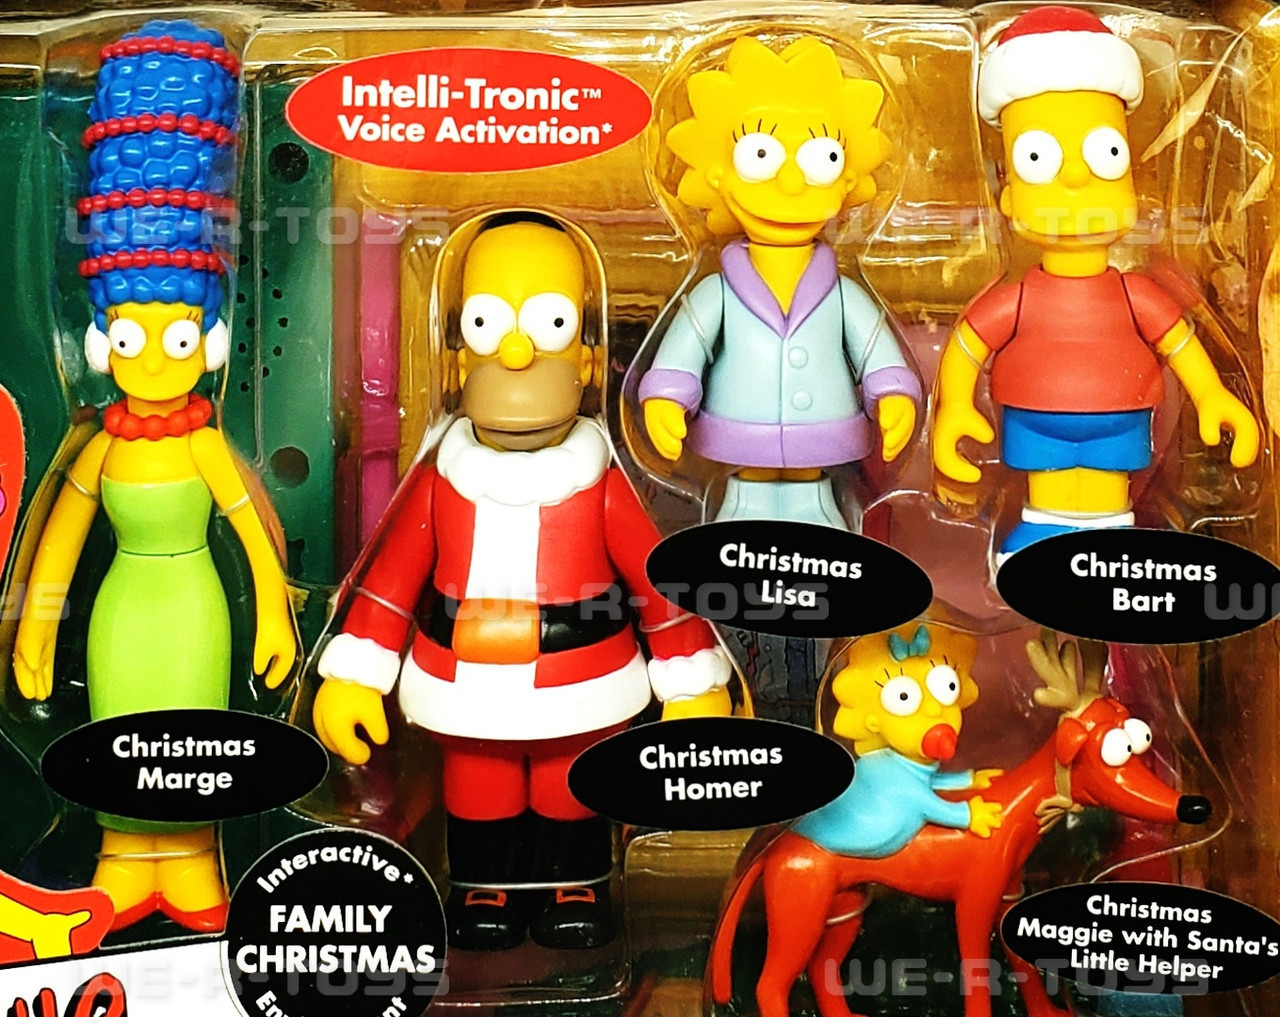 The Simpsons Family Christmas - Environment NEW Action Playset Interactive Figure We-R-Toys